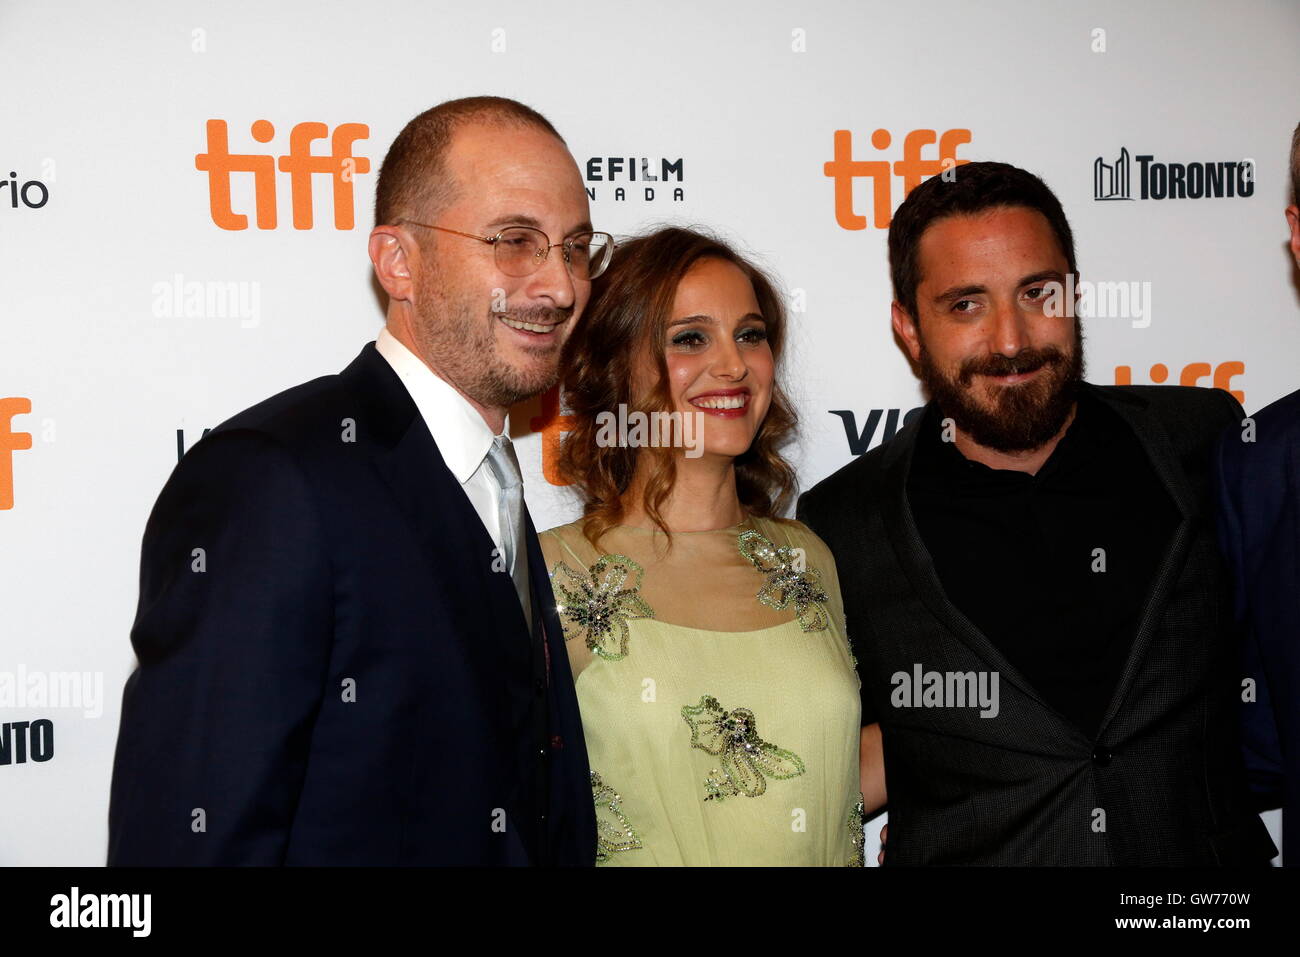 Toronto, Canada. 11th Sep, 2016. Producer Darren Aronofsky (l), Natalie Portman and director Pablo Larra·n attend the premiere of Jackie during the 41st Toronto International Film Festival, TIFF, at Elgin Theatre in Toronto, Canada, on 11 September 2016. Photo: Hubert Boesl /dpa - NO WIRE SERVICE -/dpa/Alamy Live News Stock Photo